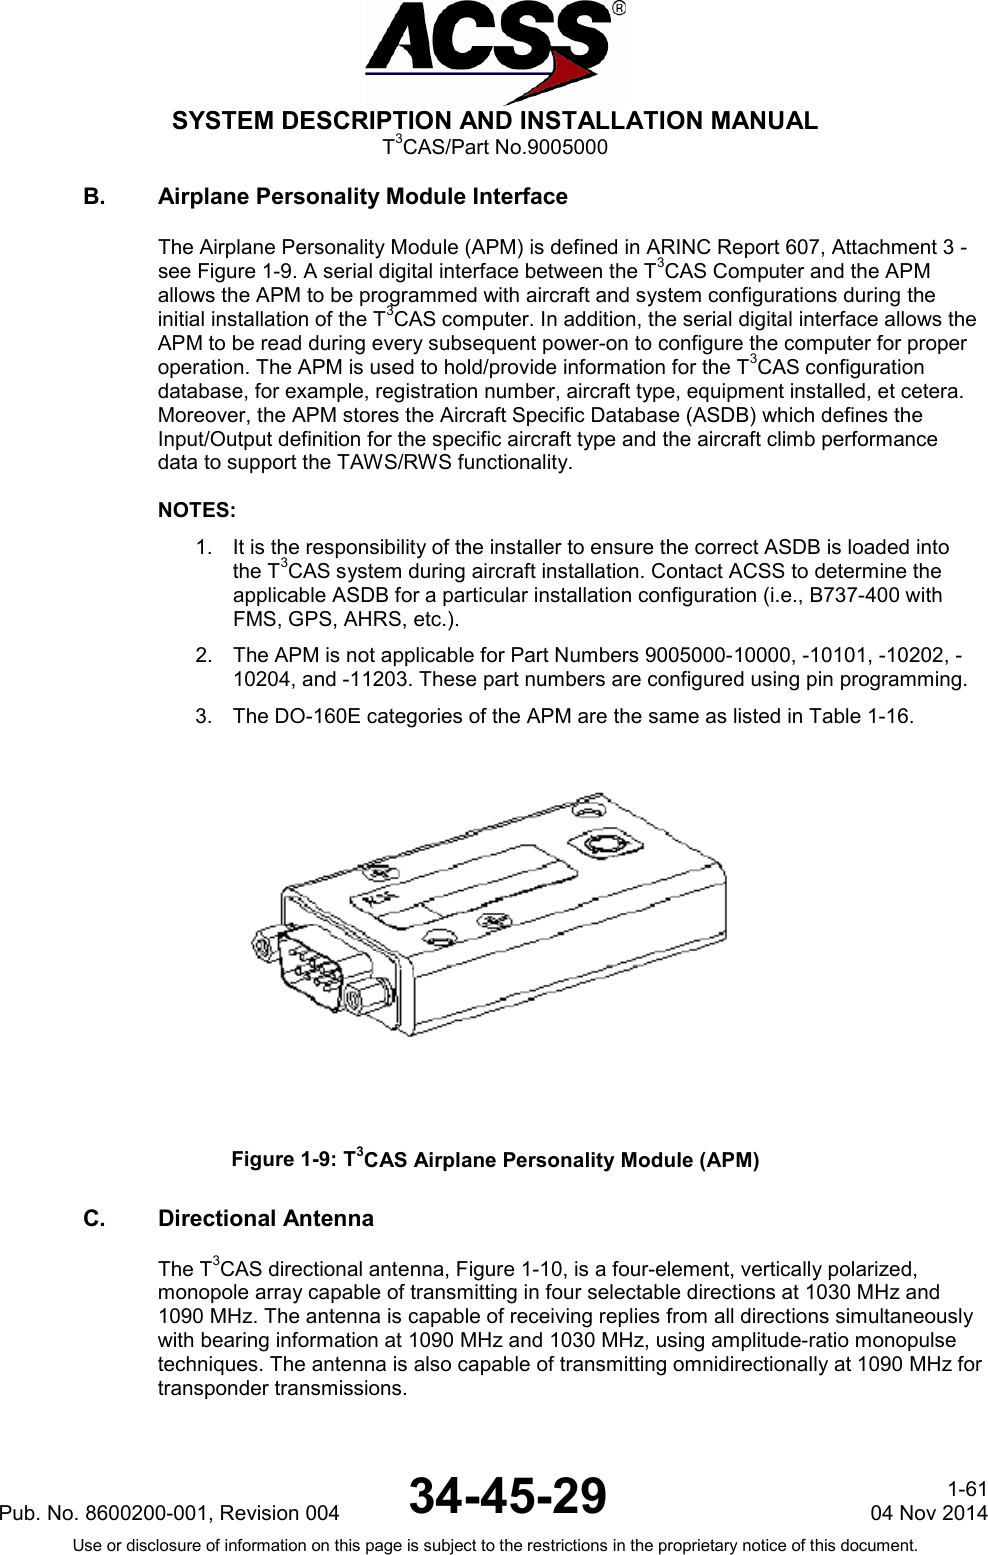  SYSTEM DESCRIPTION AND INSTALLATION MANUAL T3CAS/Part No.9005000 B. Airplane Personality Module Interface The Airplane Personality Module (APM) is defined in ARINC Report 607, Attachment 3 -see Figure 1-9. A serial digital interface between the T3CAS Computer and the APM allows the APM to be programmed with aircraft and system configurations during the initial installation of the T3CAS computer. In addition, the serial digital interface allows the APM to be read during every subsequent power-on to configure the computer for proper operation. The APM is used to hold/provide information for the T3CAS configuration database, for example, registration number, aircraft type, equipment installed, et cetera. Moreover, the APM stores the Aircraft Specific Database (ASDB) which defines the Input/Output definition for the specific aircraft type and the aircraft climb performance data to support the TAWS/RWS functionality.  NOTES: 1. It is the responsibility of the installer to ensure the correct ASDB is loaded into the T3CAS system during aircraft installation. Contact ACSS to determine the applicable ASDB for a particular installation configuration (i.e., B737-400 with FMS, GPS, AHRS, etc.). 2. The APM is not applicable for Part Numbers 9005000-10000, -10101, -10202, -10204, and -11203. These part numbers are configured using pin programming. 3. The DO-160E categories of the APM are the same as listed in Table 1-16.  Figure 1-9: T3CAS Airplane Personality Module (APM) C. Directional Antenna The T3CAS directional antenna, Figure 1-10, is a four-element, vertically polarized, monopole array capable of transmitting in four selectable directions at 1030 MHz and 1090 MHz. The antenna is capable of receiving replies from all directions simultaneously with bearing information at 1090 MHz and 1030 MHz, using amplitude-ratio monopulse techniques. The antenna is also capable of transmitting omnidirectionally at 1090 MHz for transponder transmissions.  Pub. No. 8600200-001, Revision 004 34-45-29 1-61 04 Nov 2014 Use or disclosure of information on this page is subject to the restrictions in the proprietary notice of this document.  